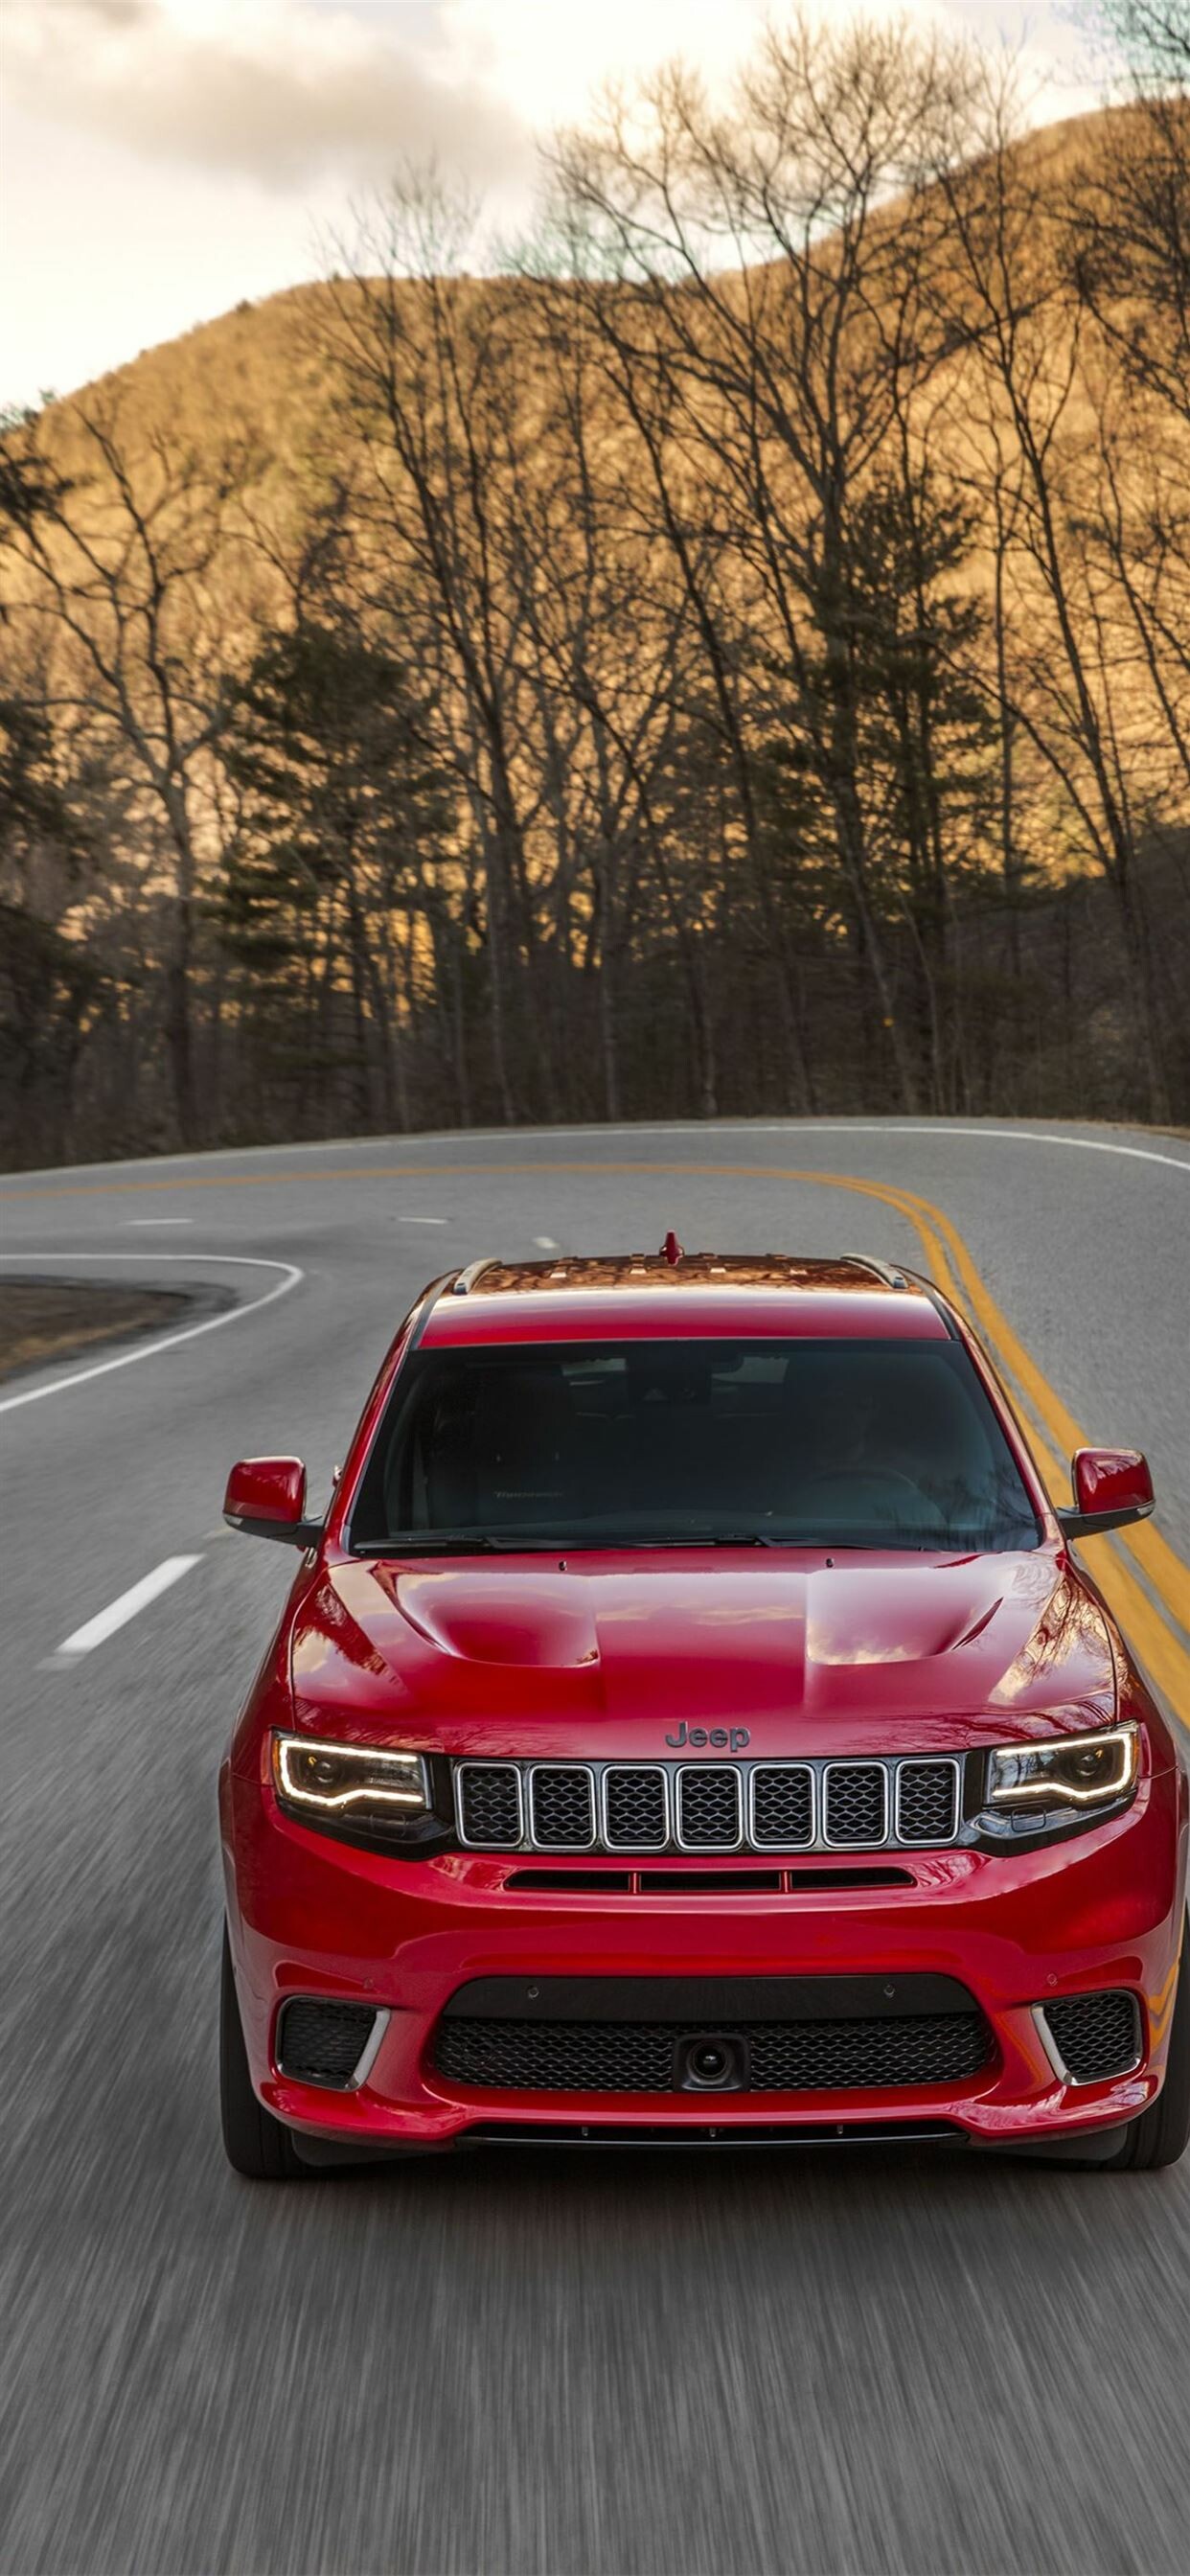 Jeep Grand Cherokee: Powerful SUV, Base 3.6-liter V6 gas engine, Produces 290 horsepower. 1250x2690 HD Background.